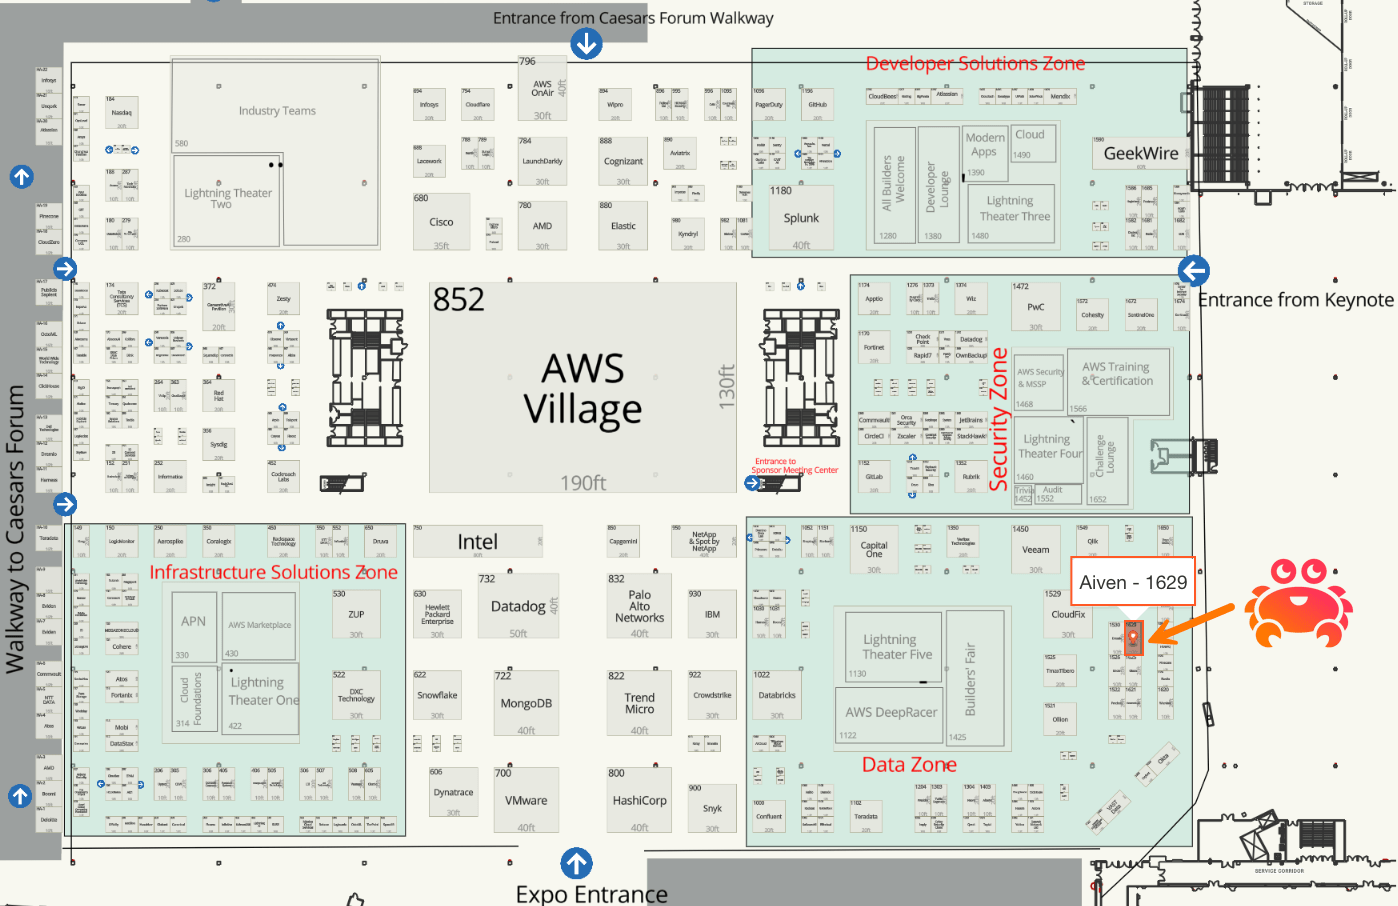 Image showing the AWS re booth floor. Aiven's booth is located in the southeast quadrant of the map, in an area labeled Data Zone. The nearest entrance is the Expo Entrance to the south or the Entrance from Keynote to the east. You can find Aiven at booth 1629.